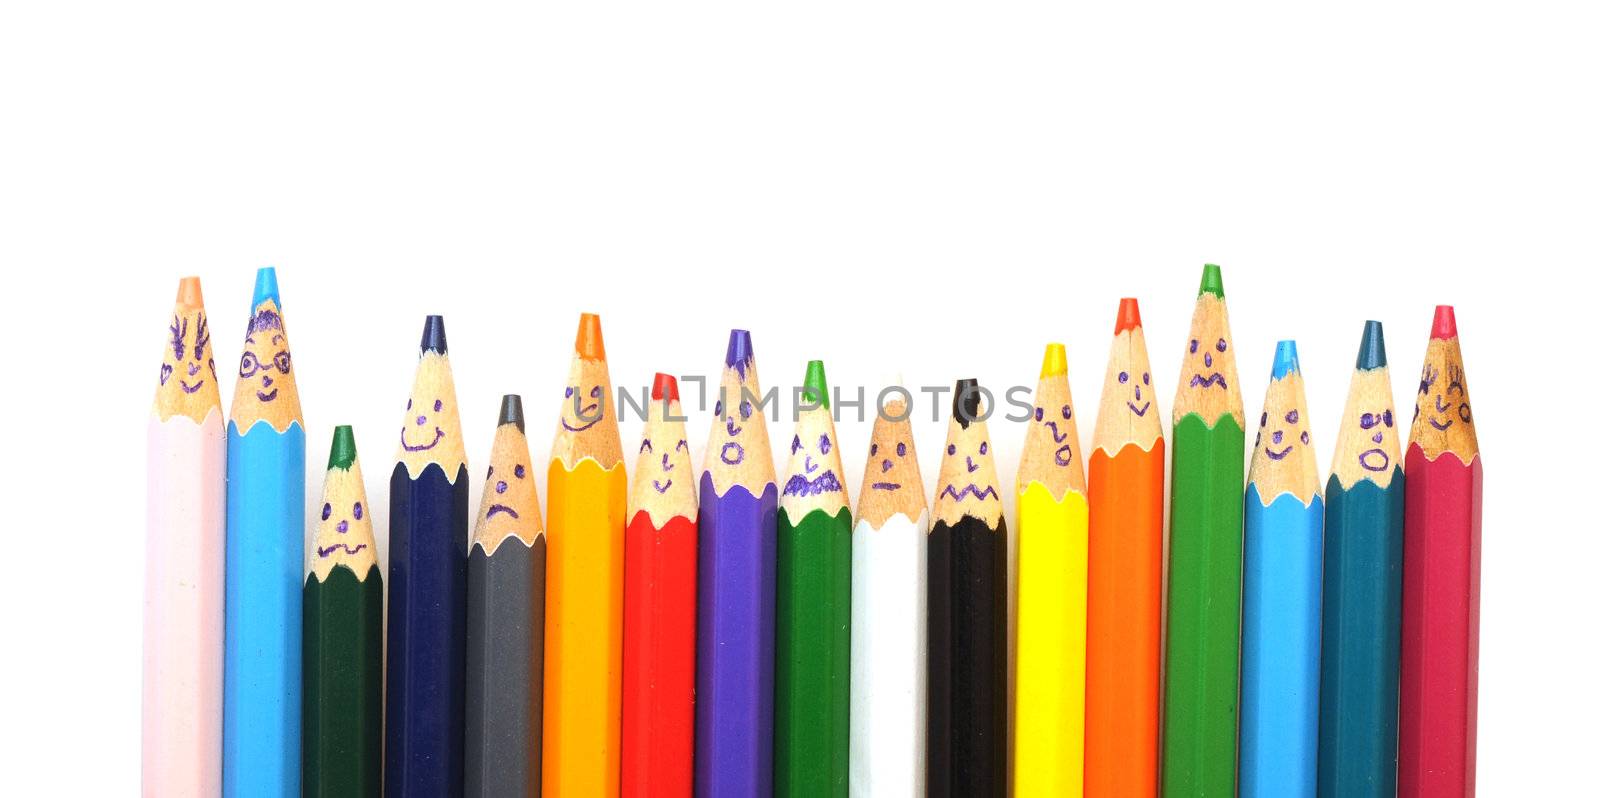 Happy group of pencil faces   by inxti